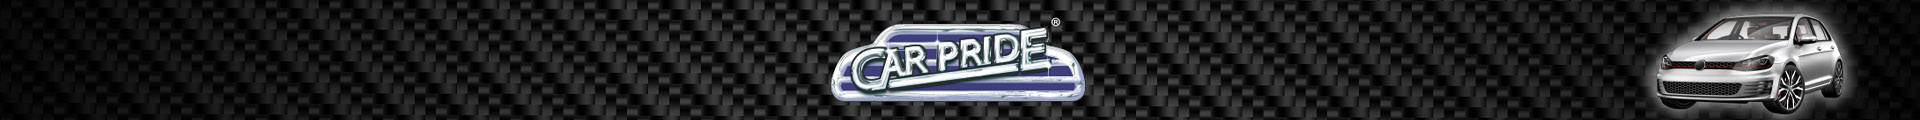 Car Pride Products Banner 